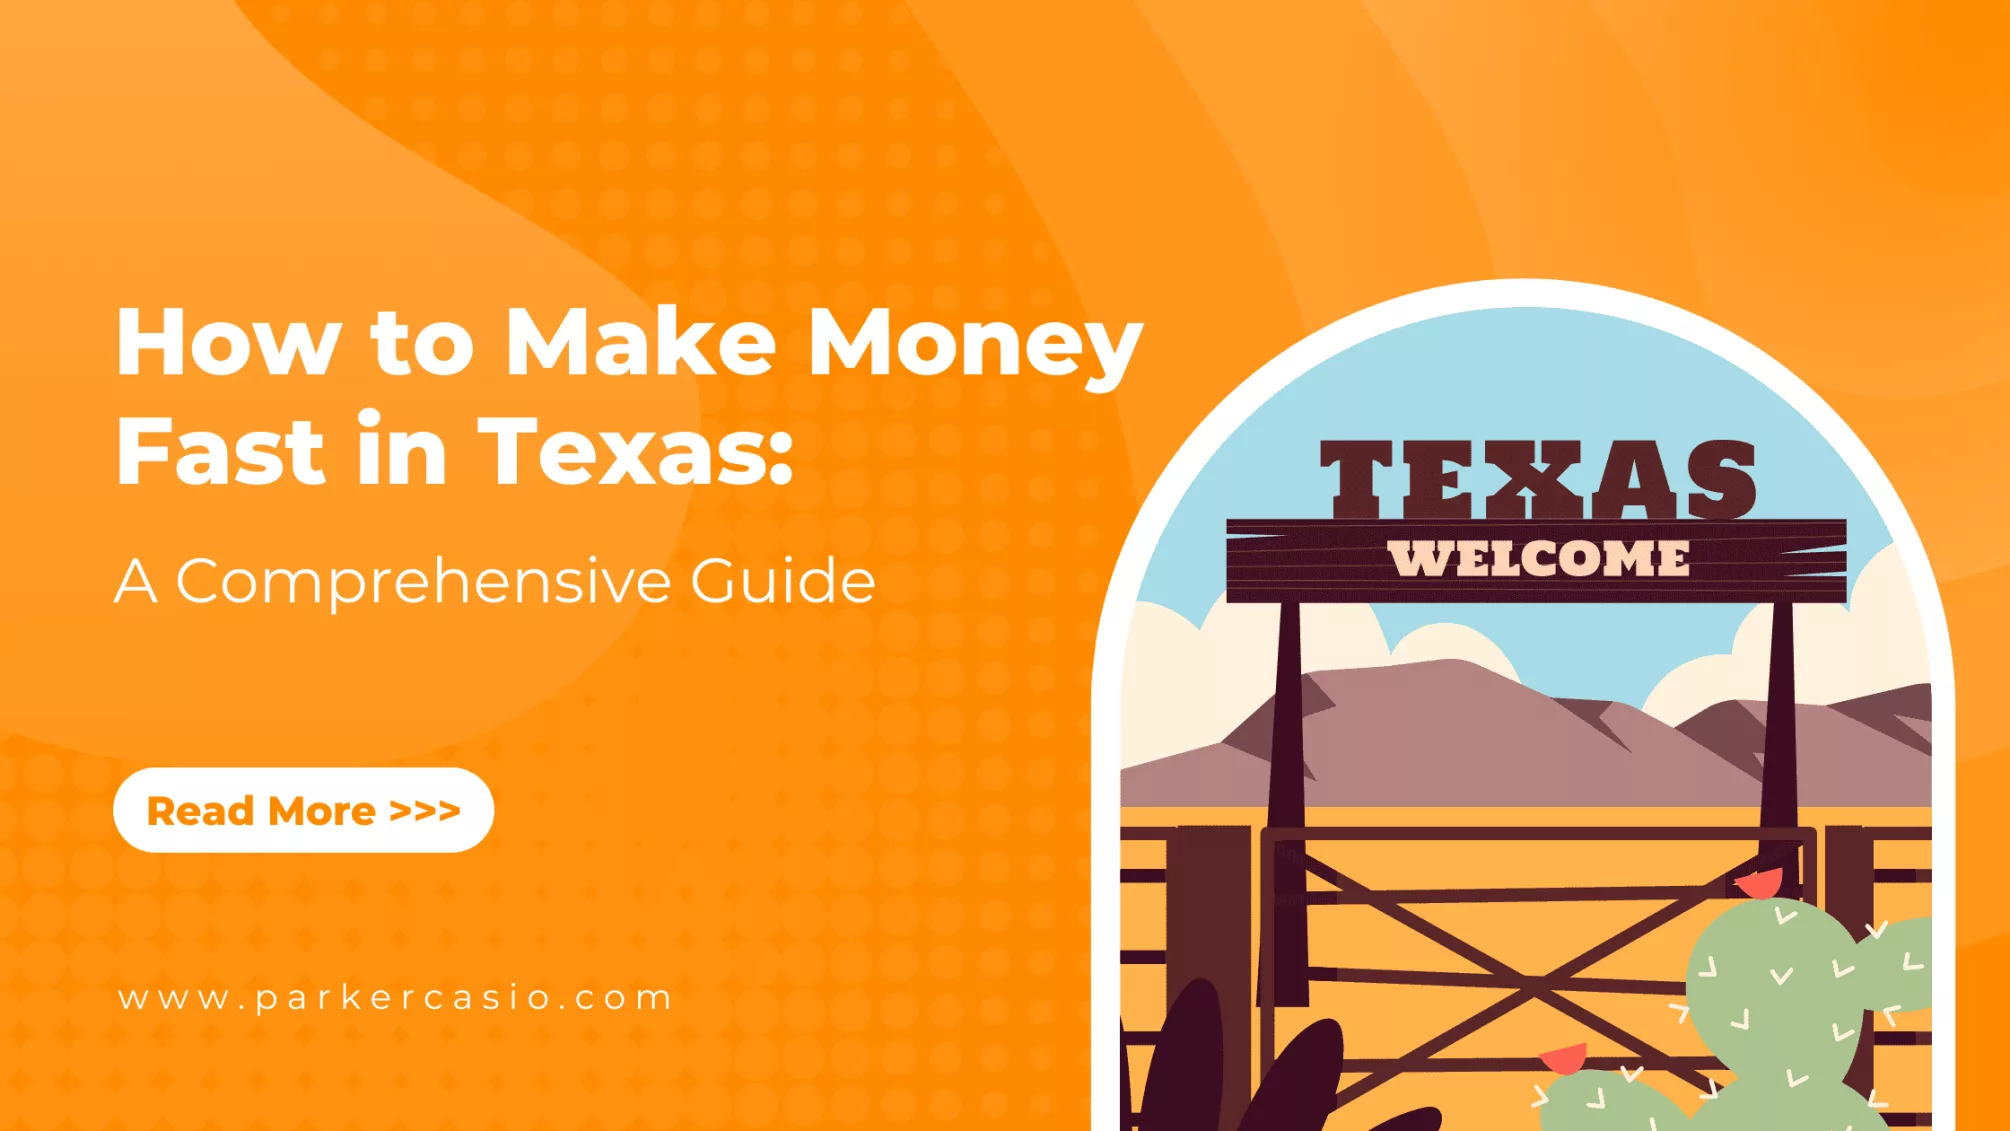 How to Make Money Fast in Texas: A Comprehensive Guide